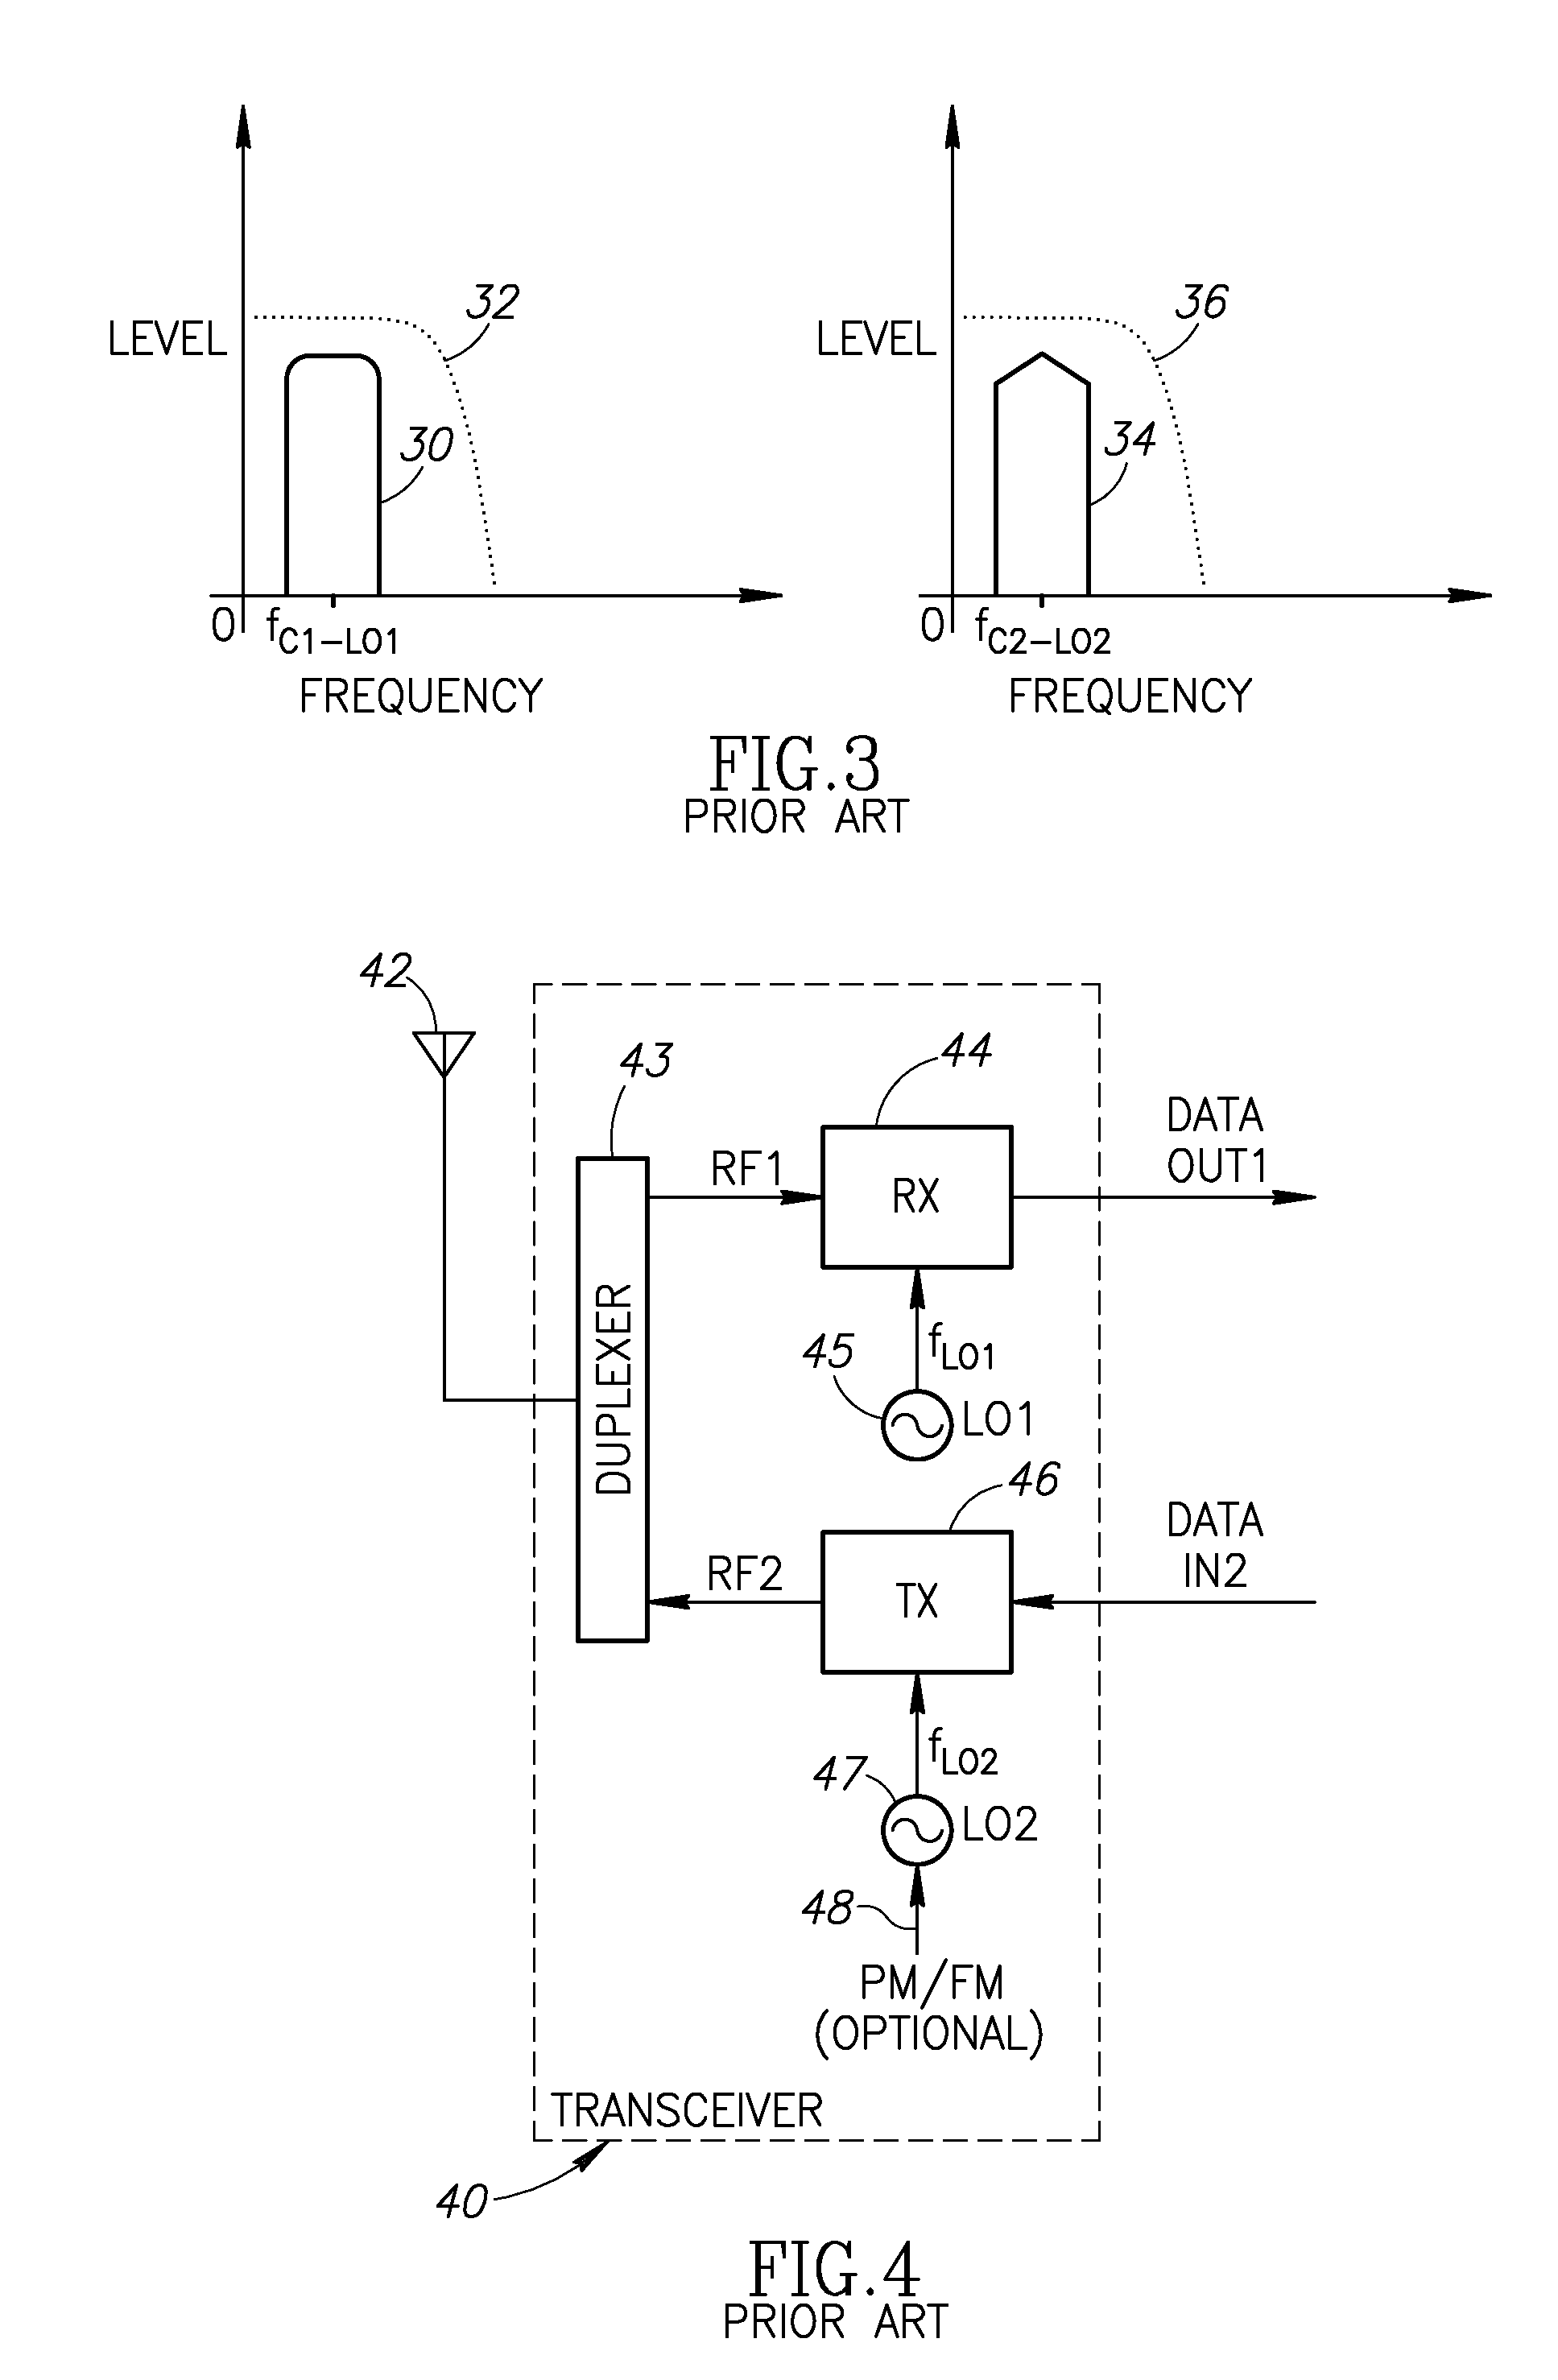 Simultaneous multiple signal reception and transmission using frequency multiplexing and shared processing